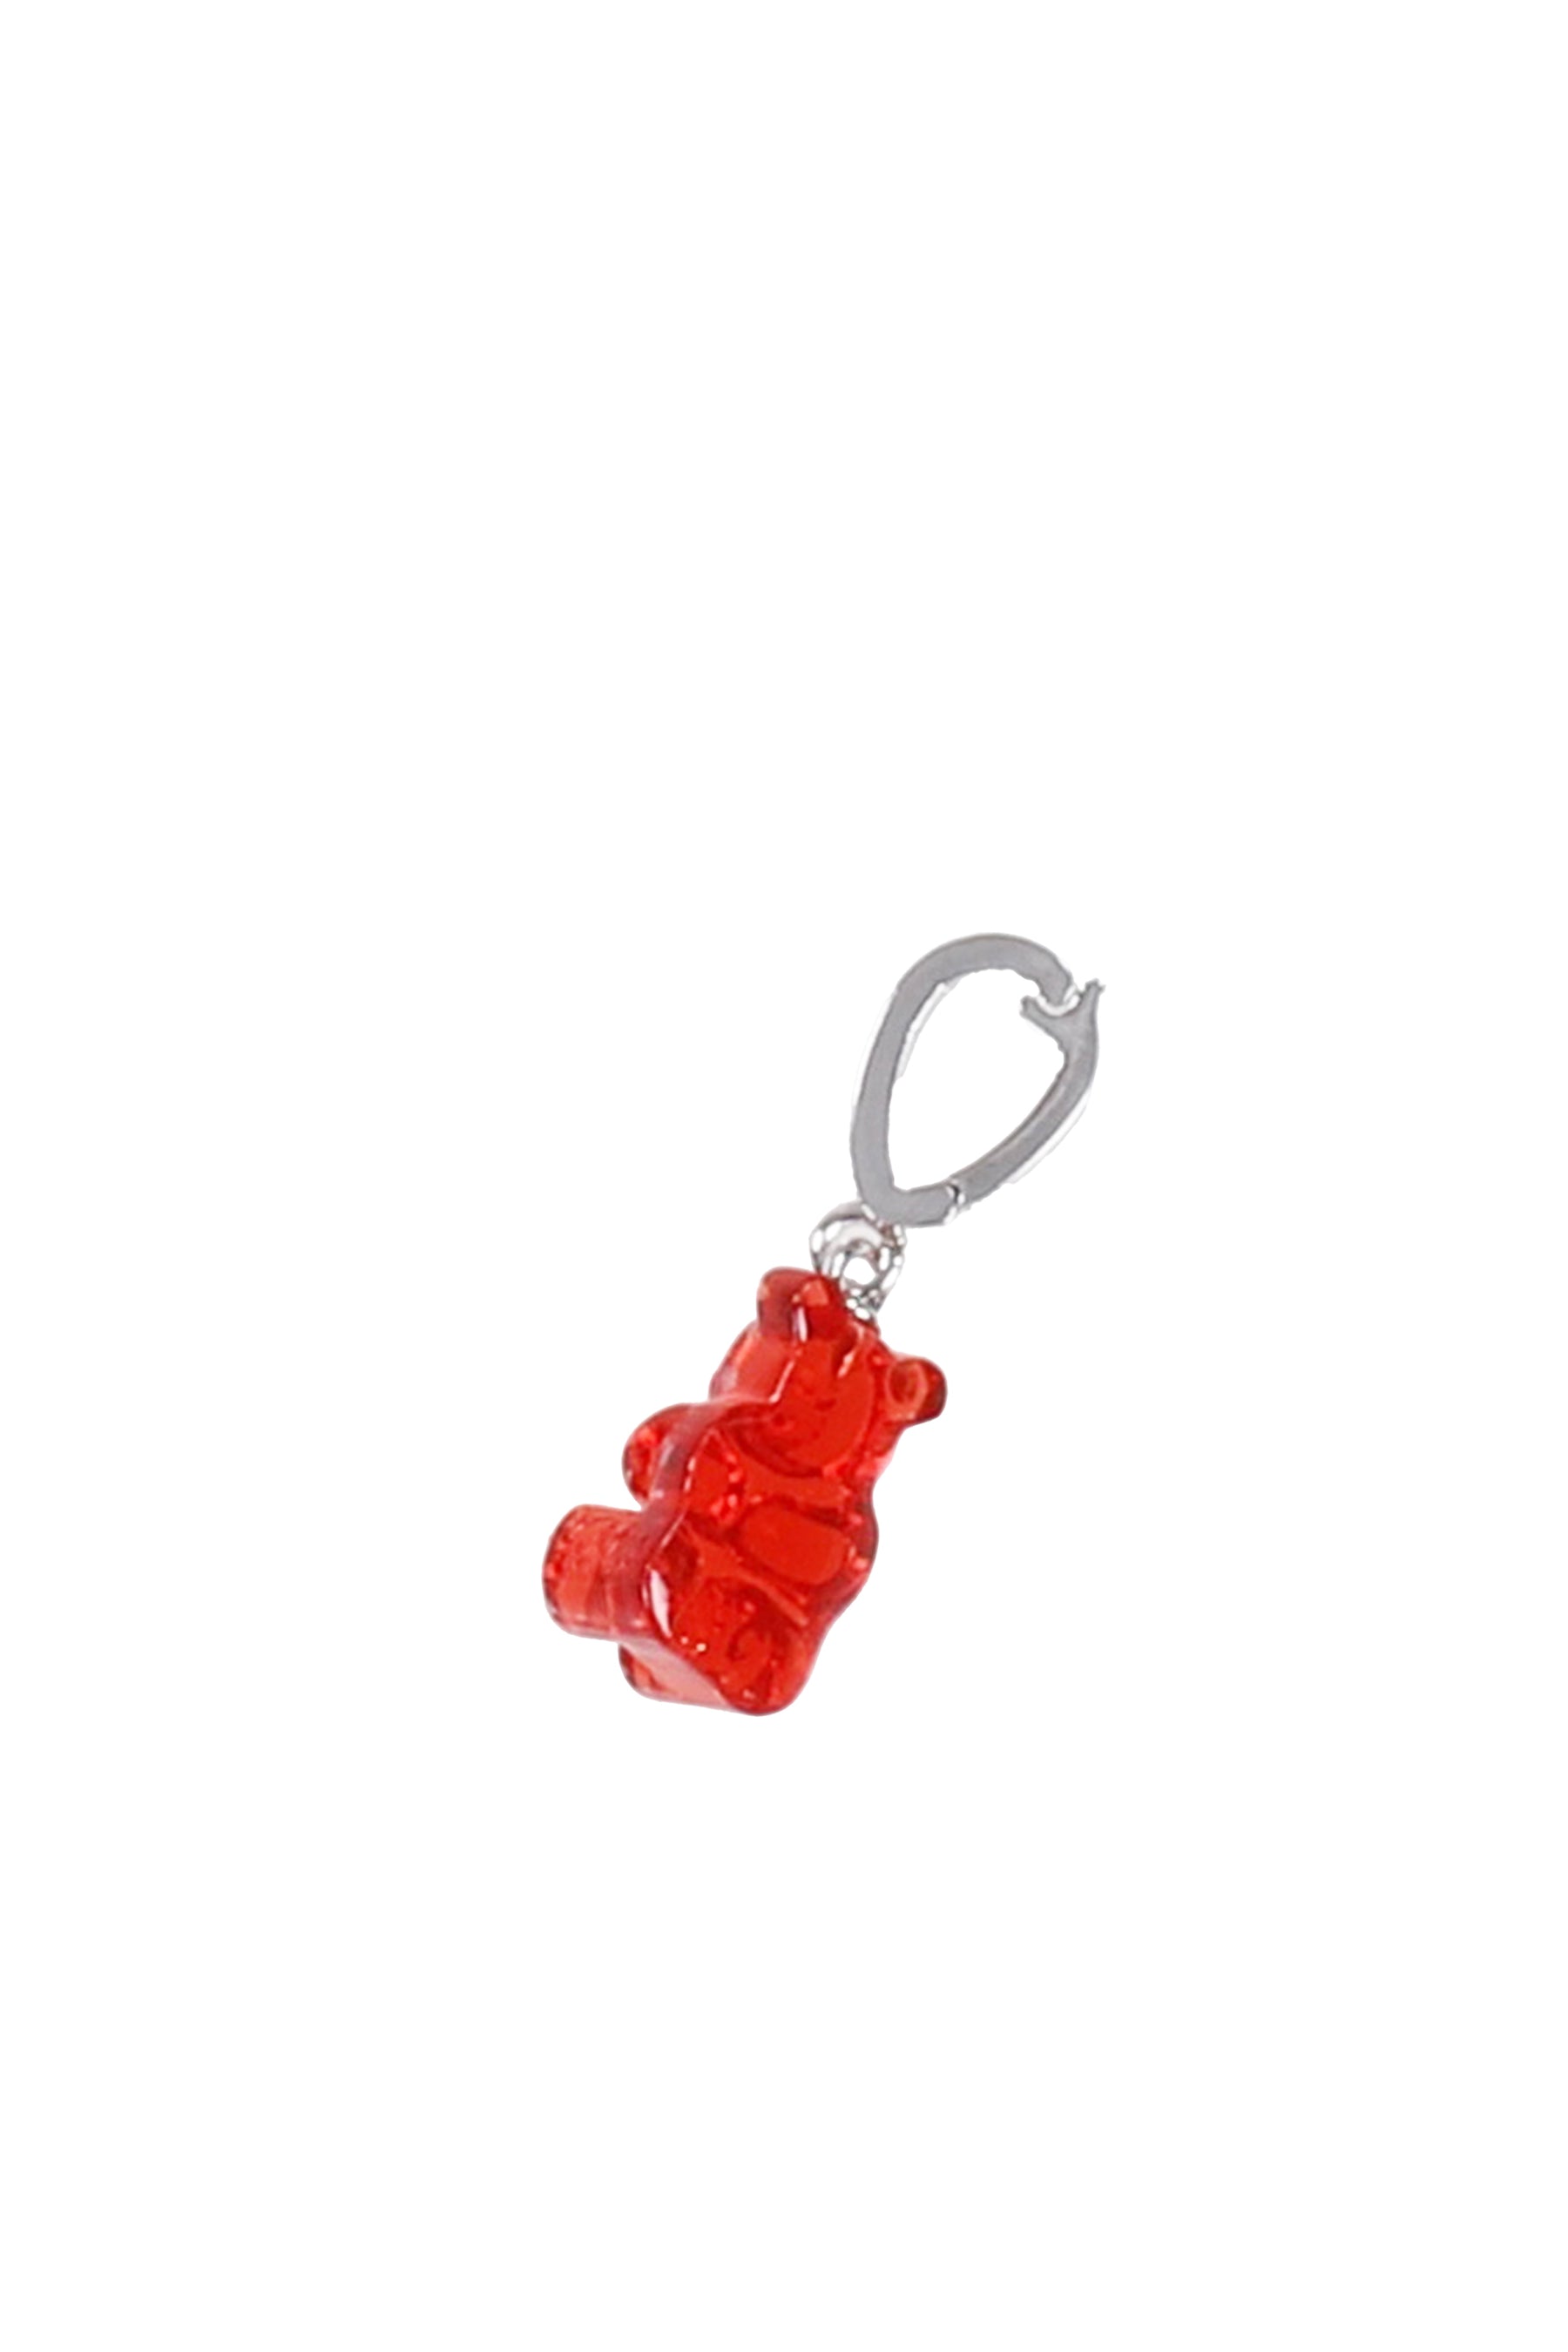 CANDY BEAR PENDANT / RED